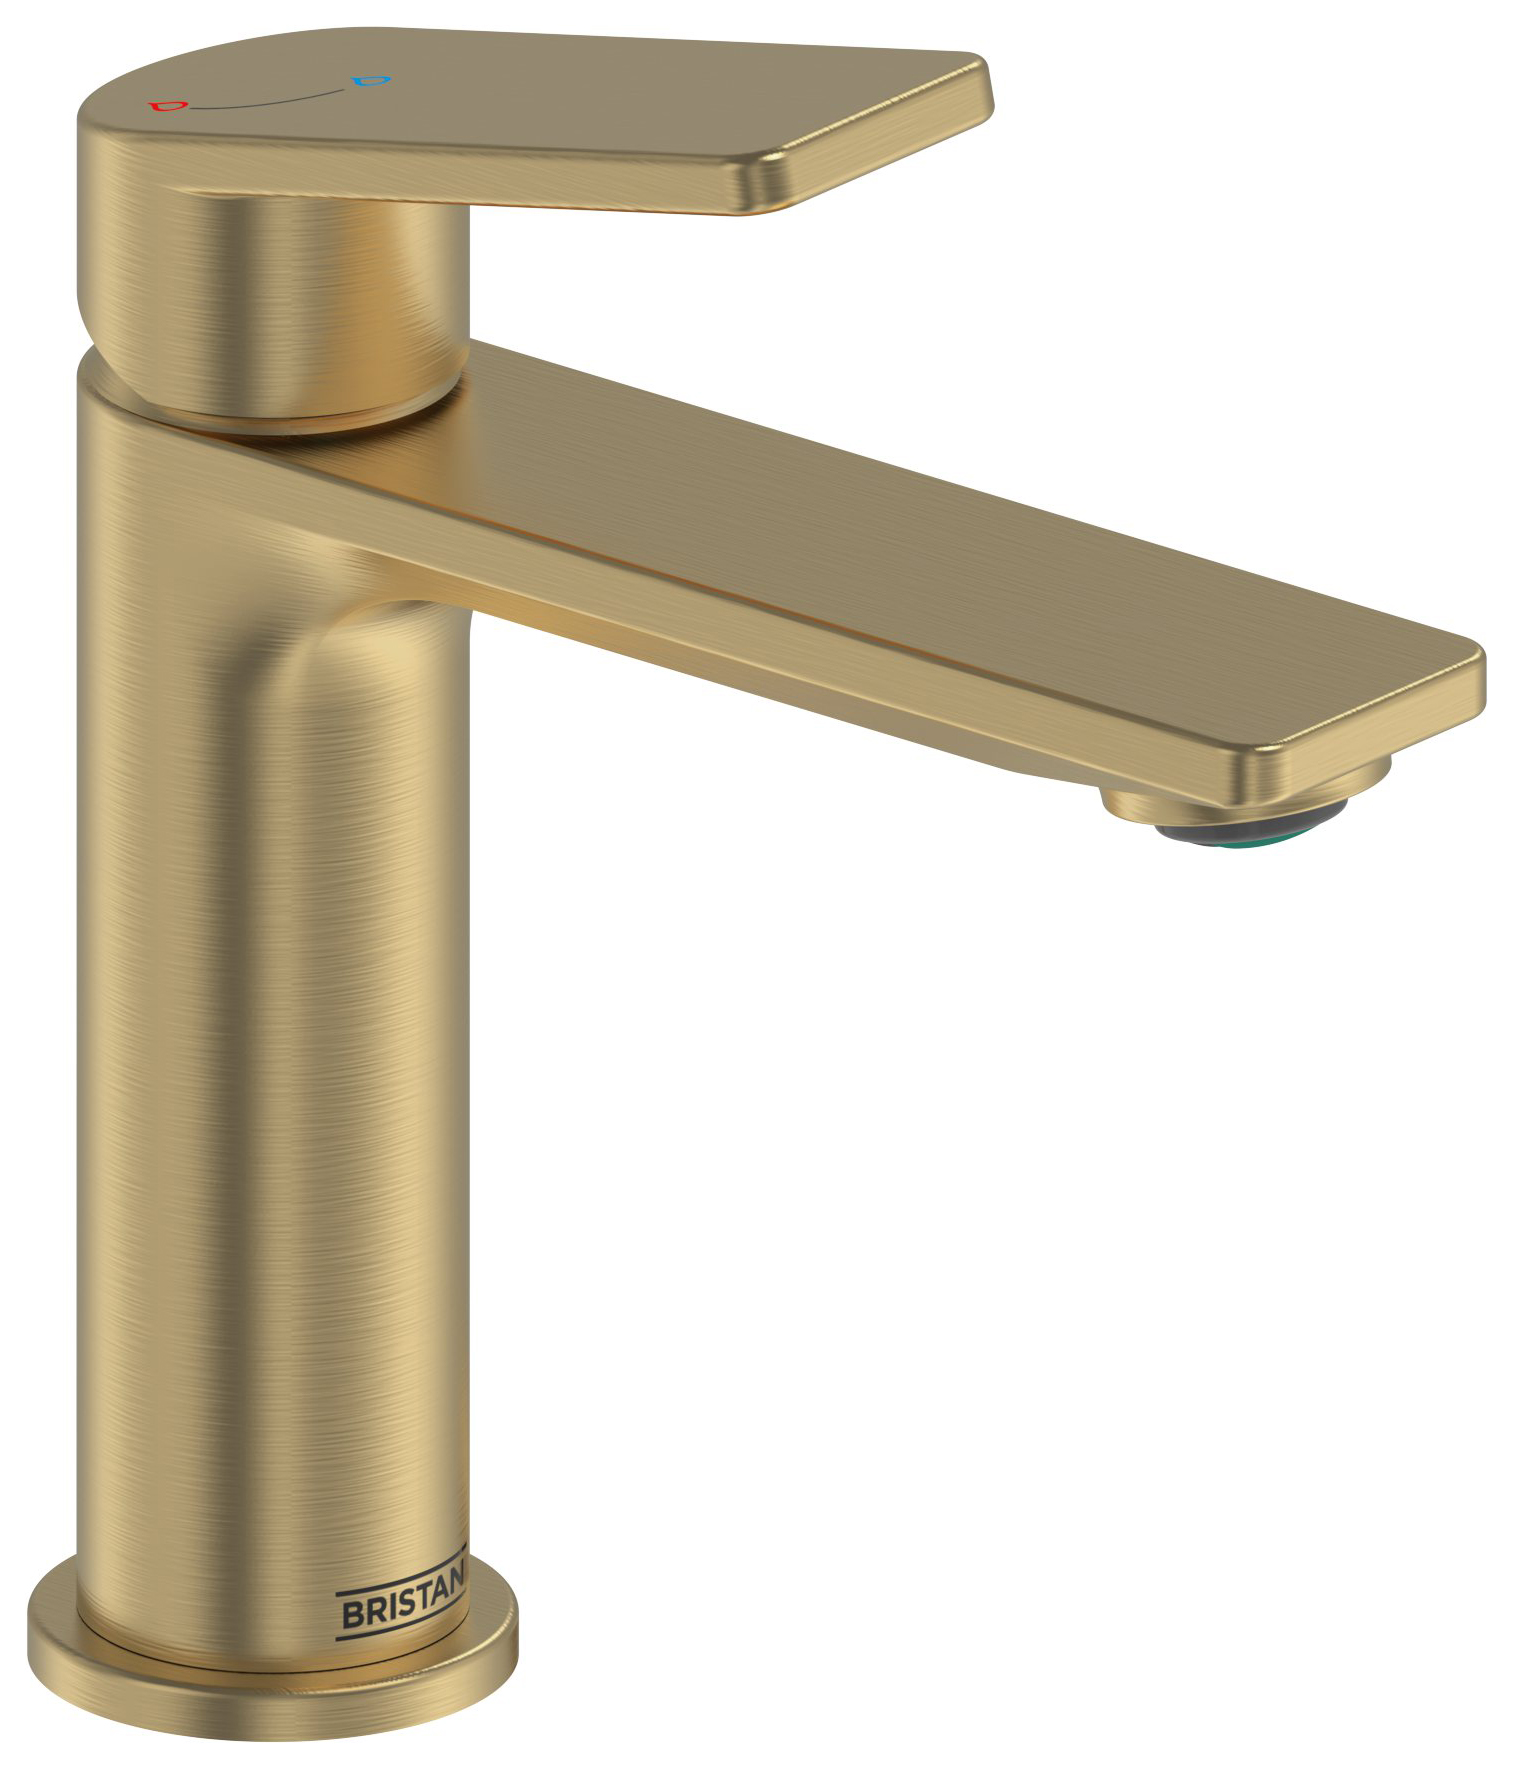 Bristan Frammento Eco Start Small Basin Mixer with Clicker Waste - Brushed Brass